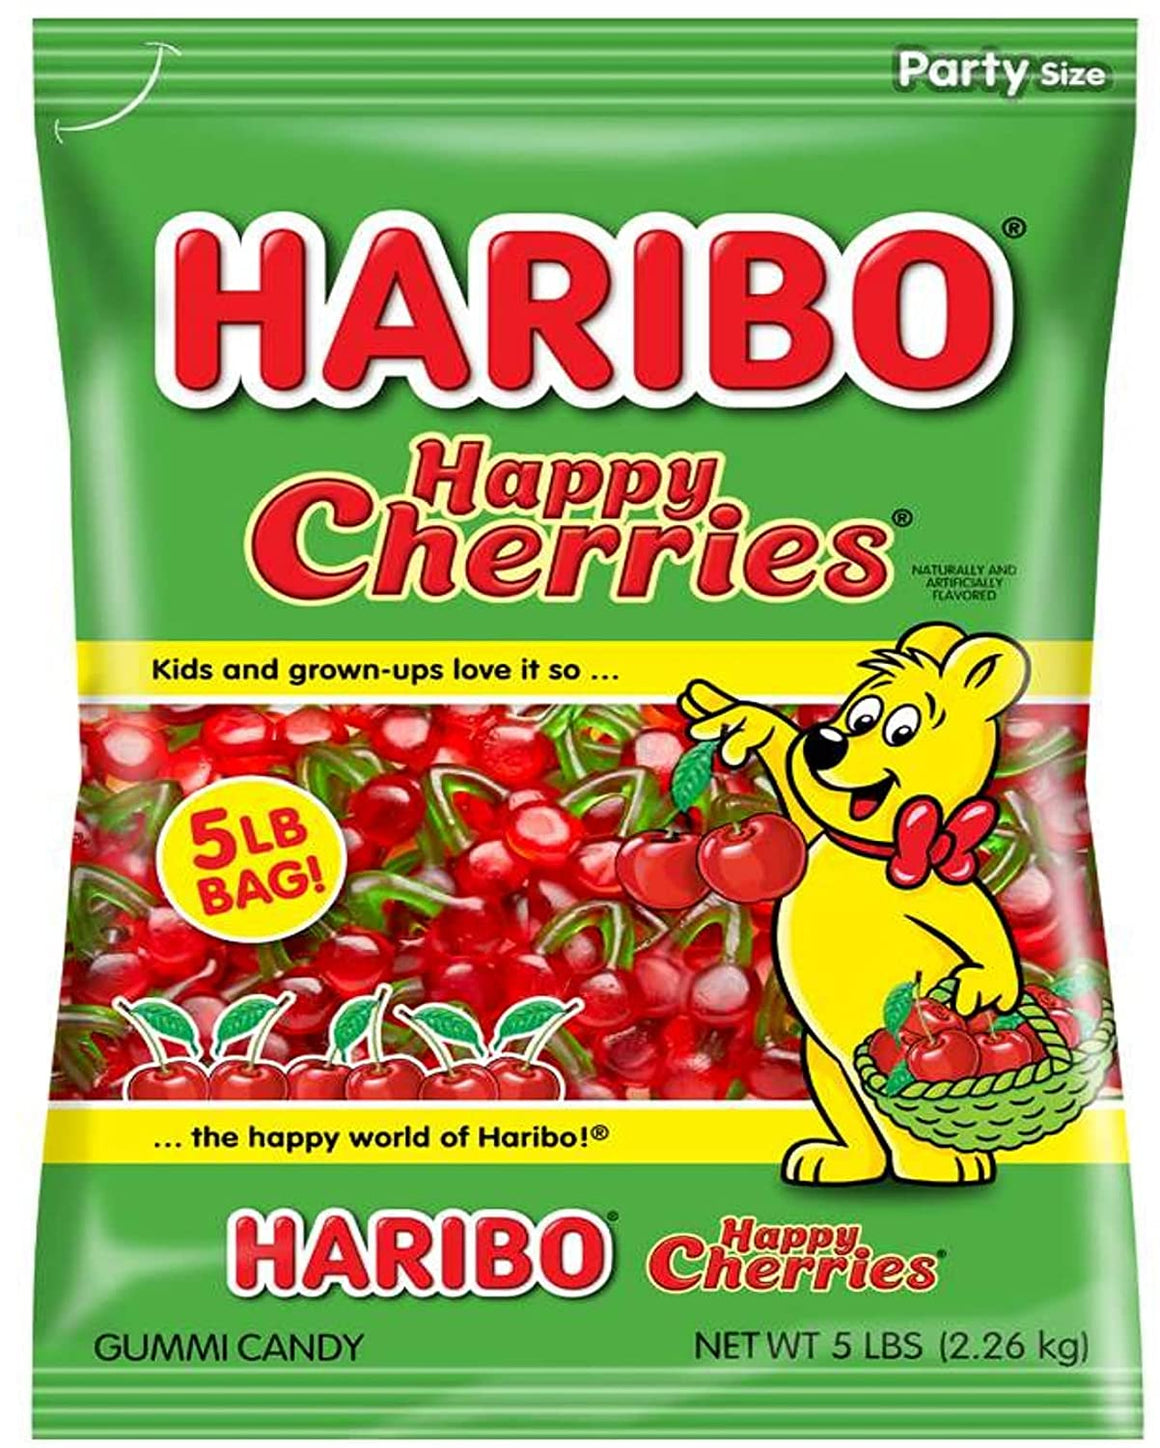 All City Candy Haribo Twin Cherries Gummi Candy - 5 LB Bulk Bag Bulk Unwrapped Haribo Candy For fresh candy and great service, visit www.allcitycandy.com